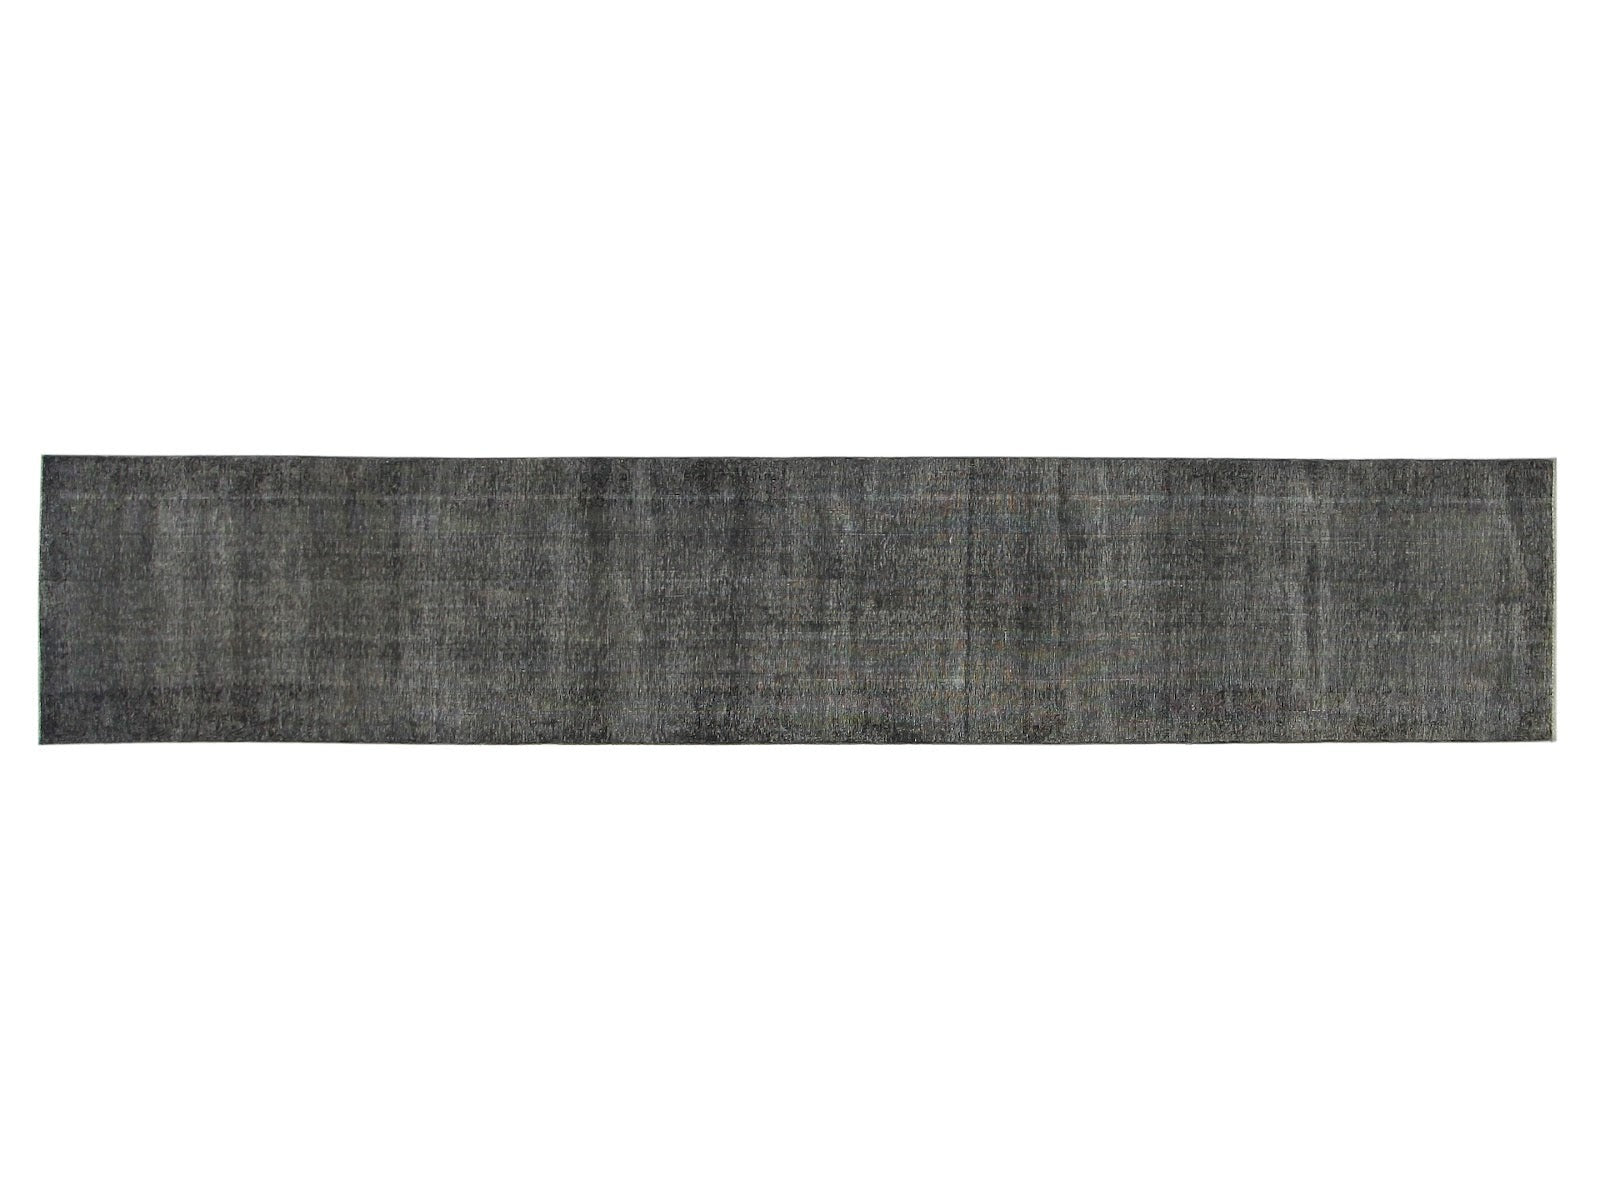 Twenty-foot vintage Persian wool runner in a single faded black/gray color, hand-knotted in Persia.